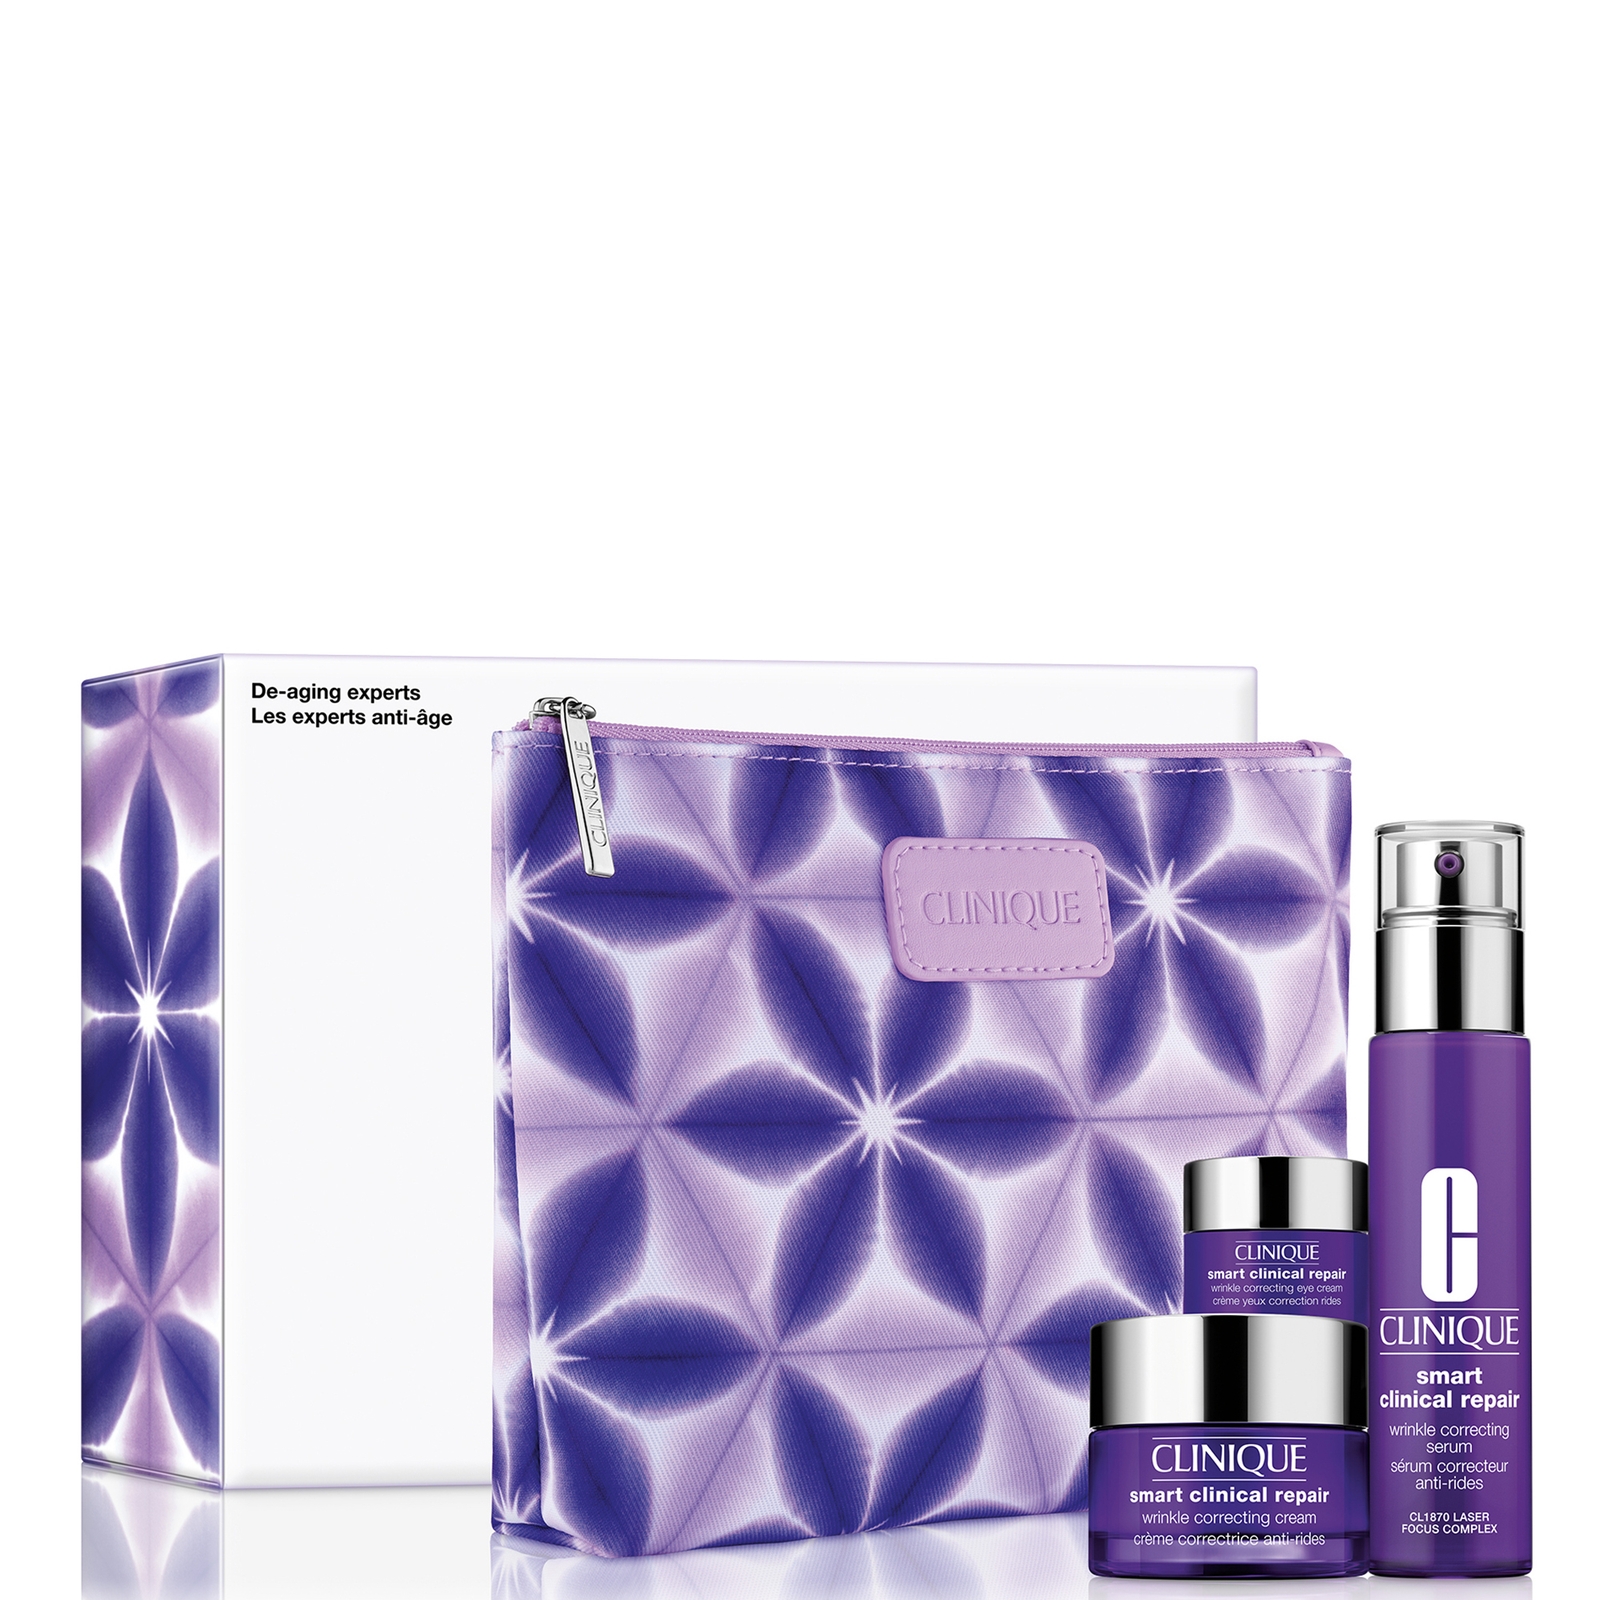 Clinique Anti-ageing Experts Serum Skincare Gift Set In White